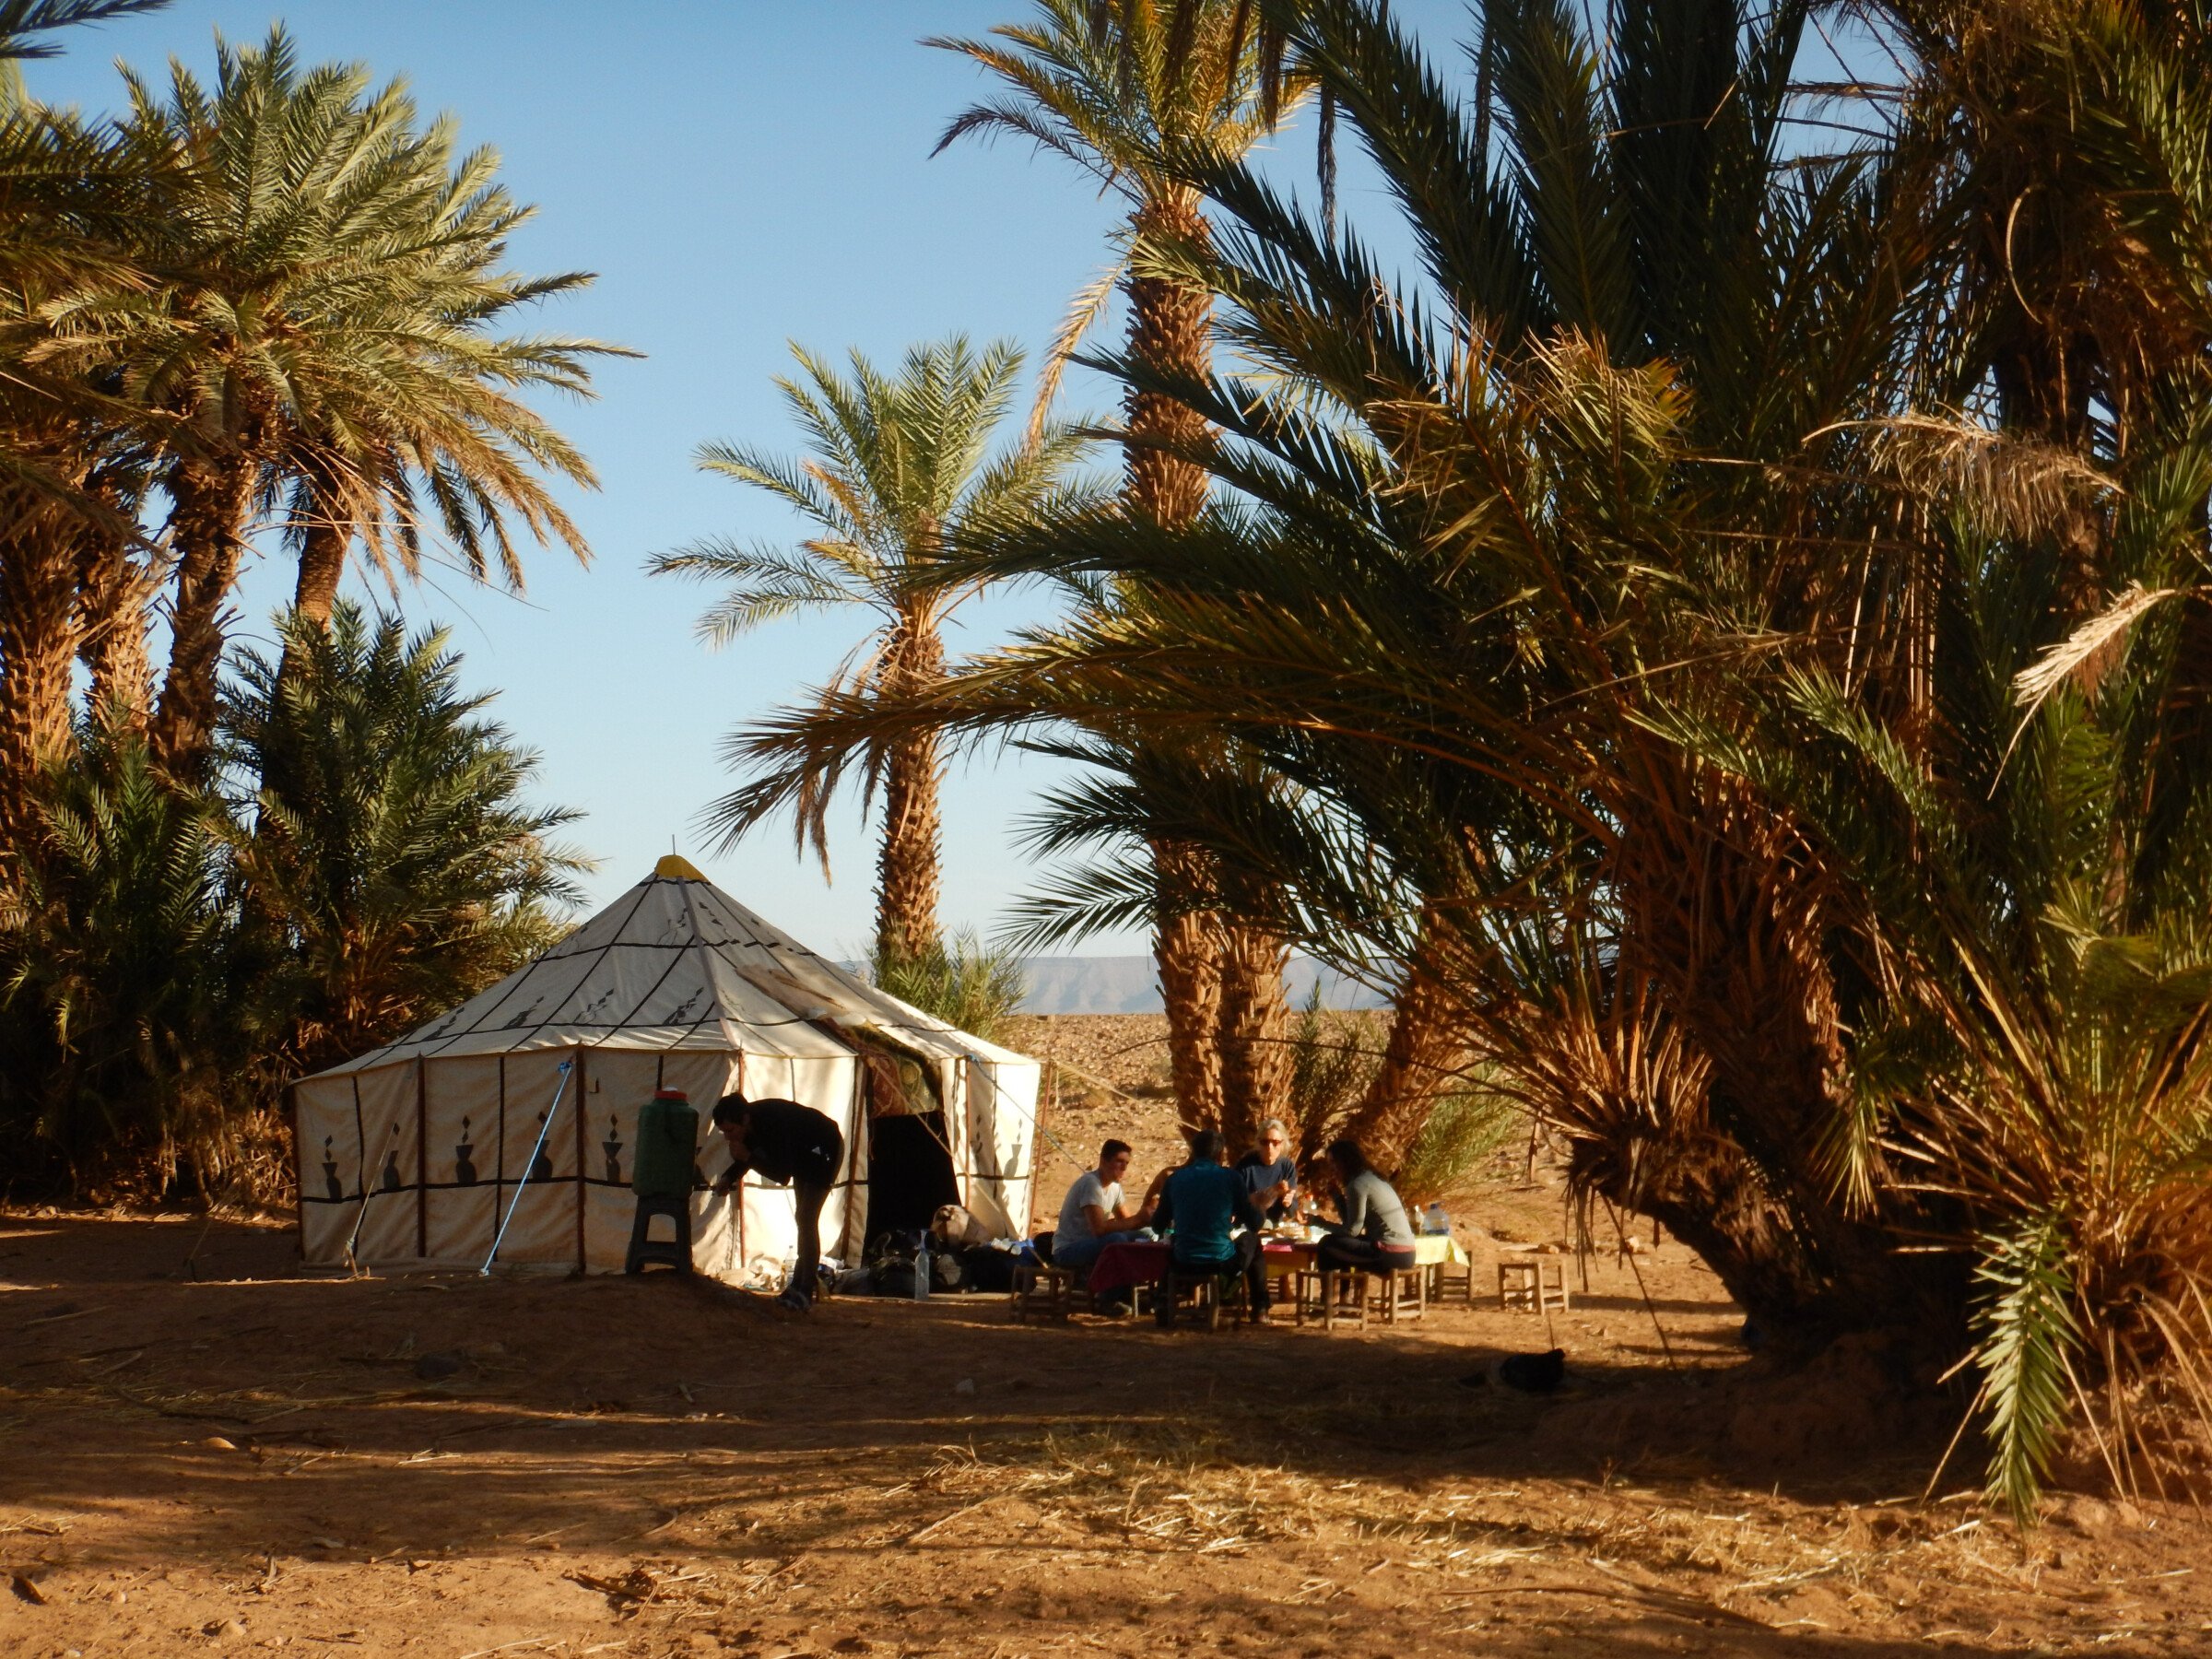 Alternative accommodations to try in Morocco